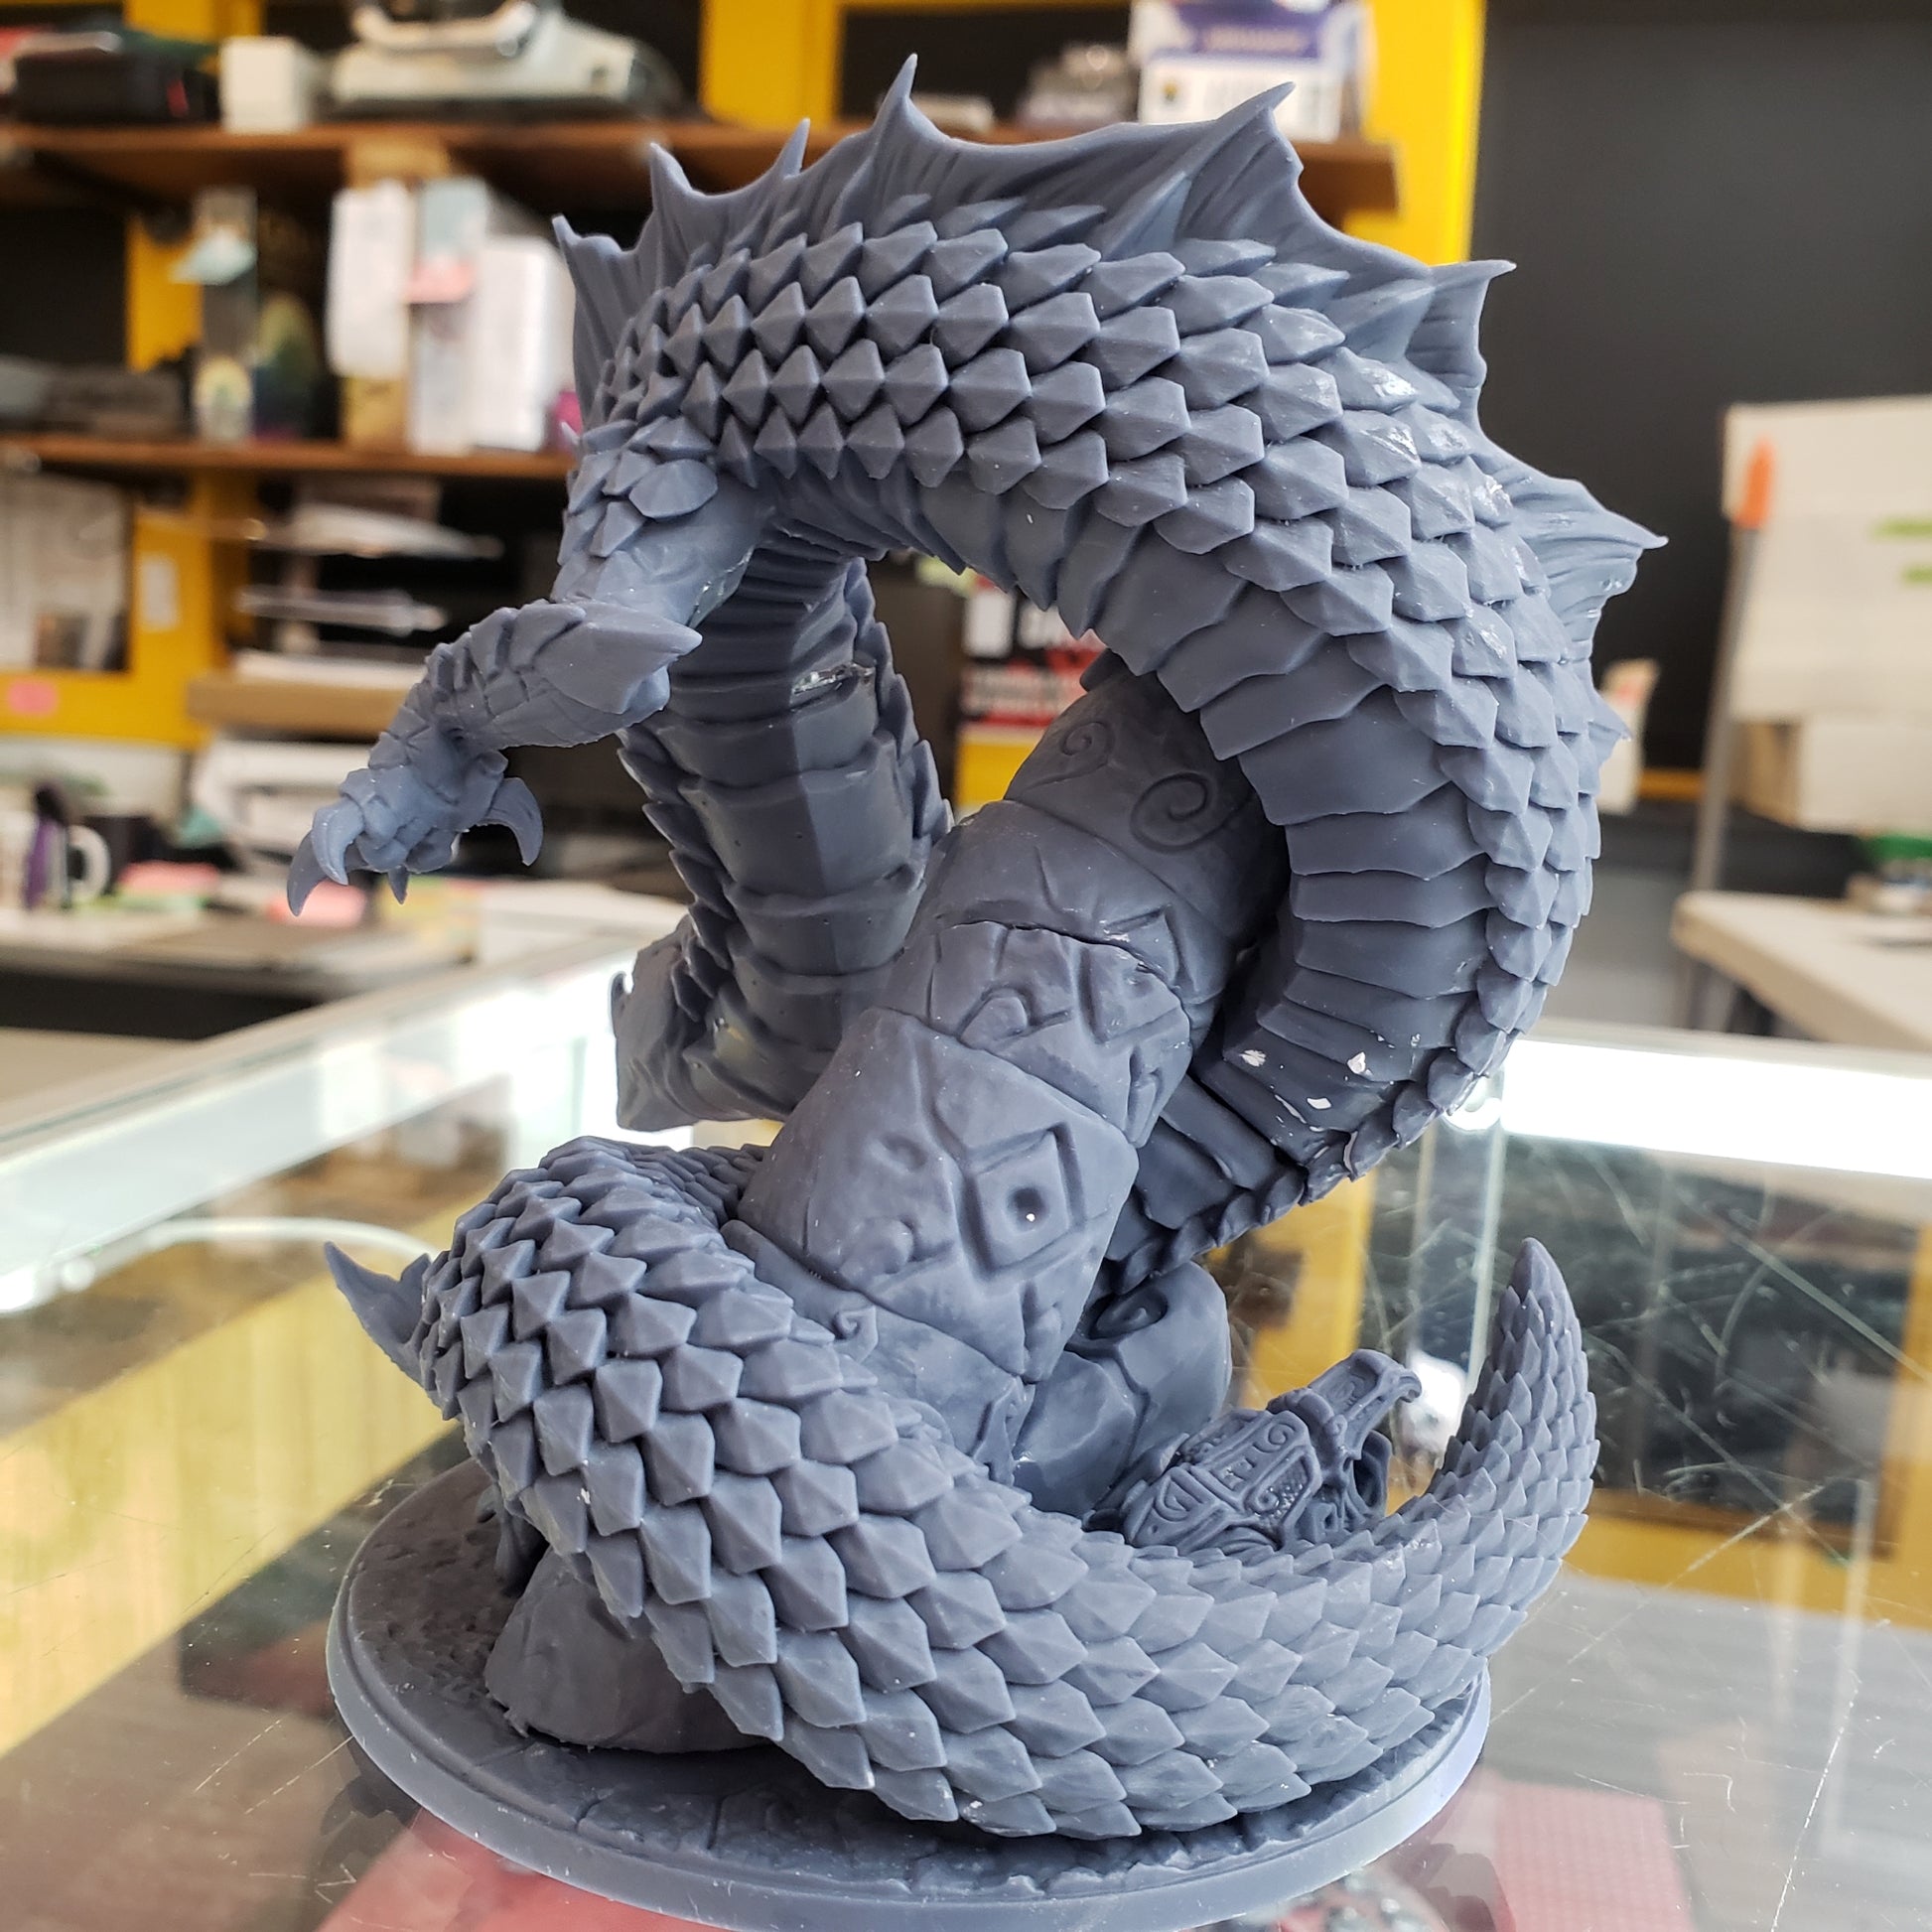 Image shows an example of a 3D printed snake-like dragon gaming miniature printed in-house at All Systems Go